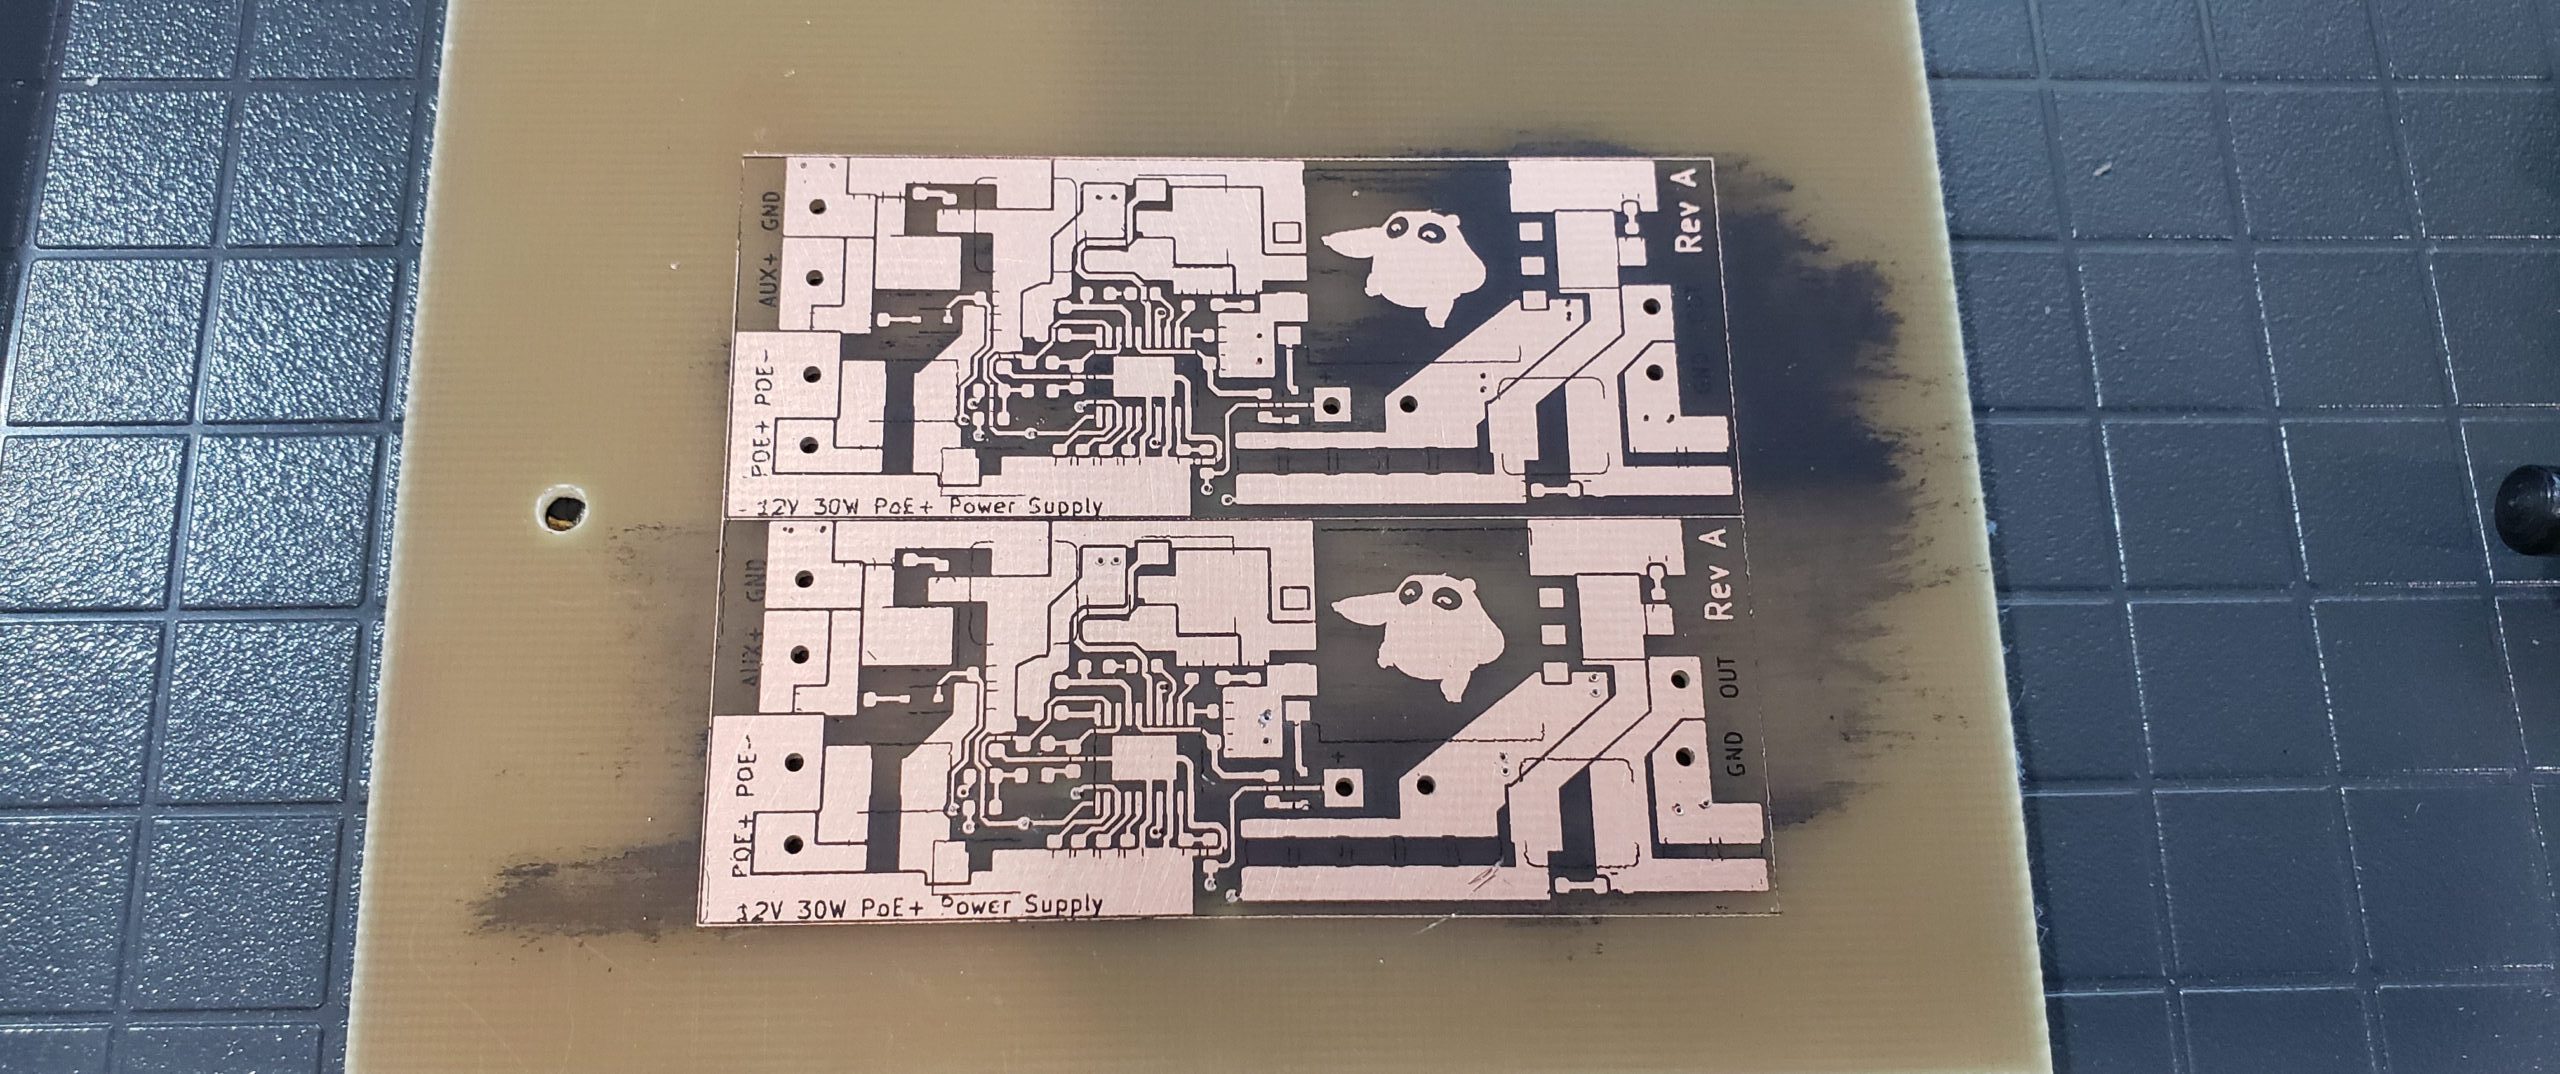 Etching PCBs at Home for Fun and Profit